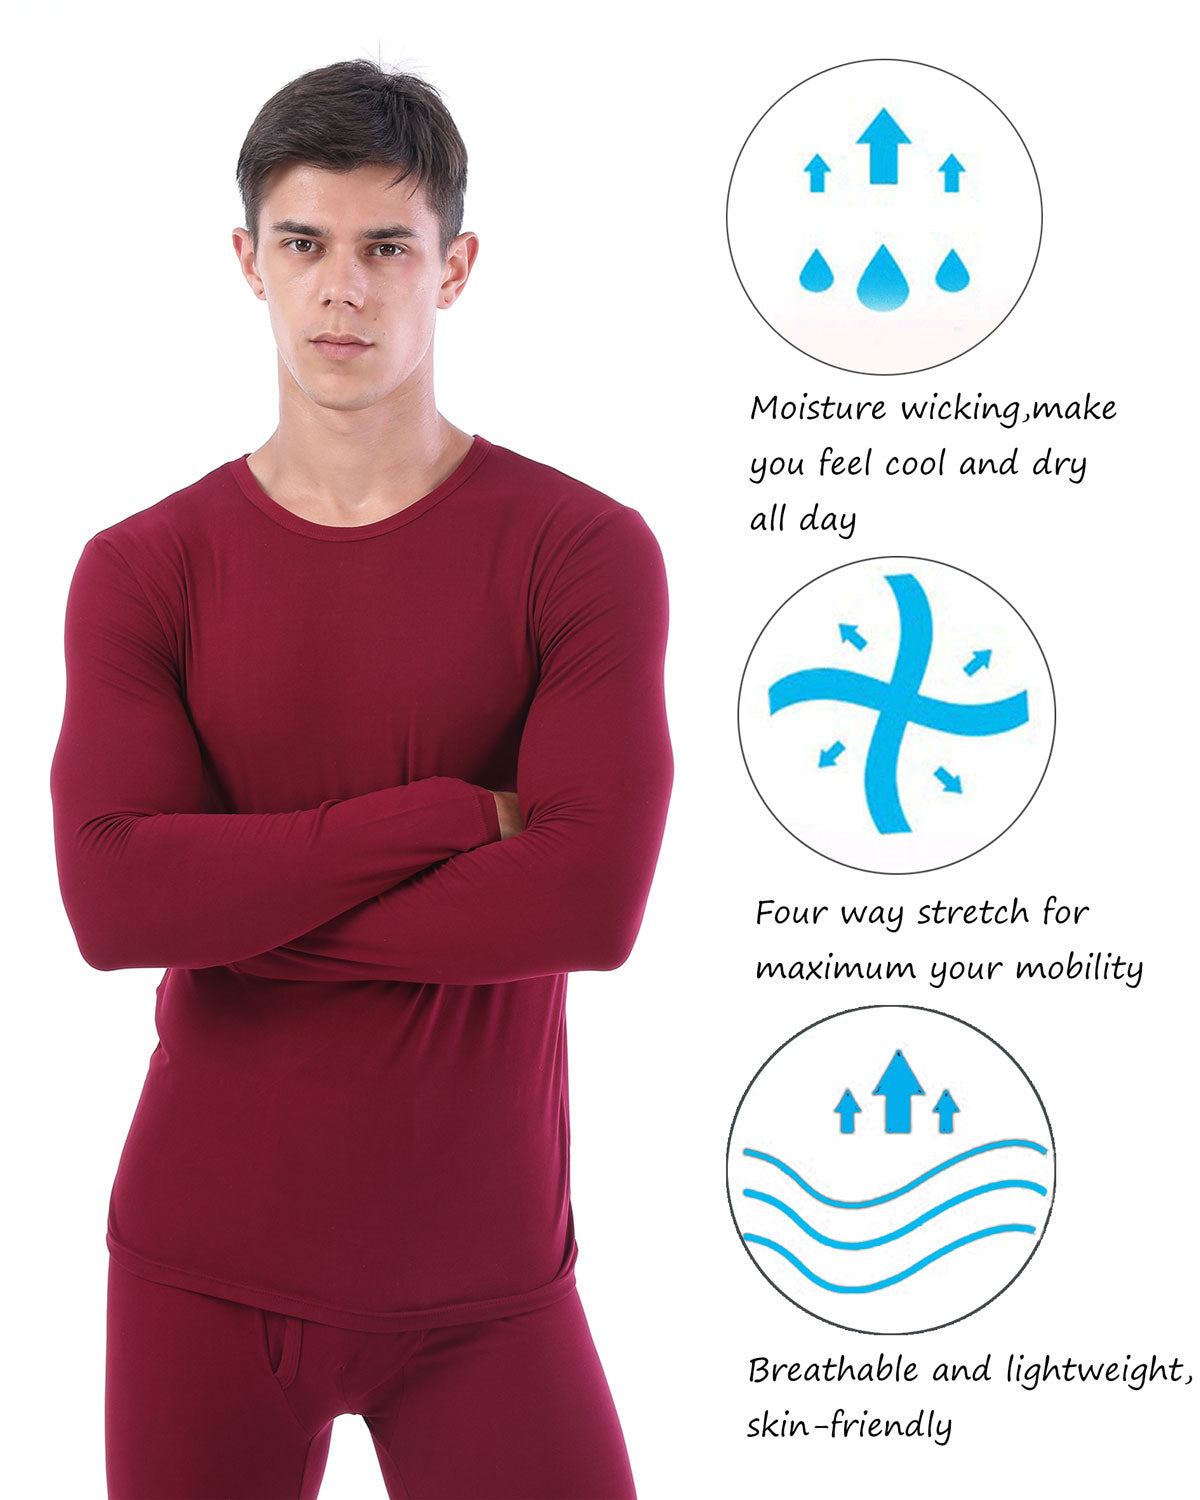 Men Traditional Long Johns Thermal Underwear Top Male Ultra Soft Fleece Tee Cold Weather LANBAOSI